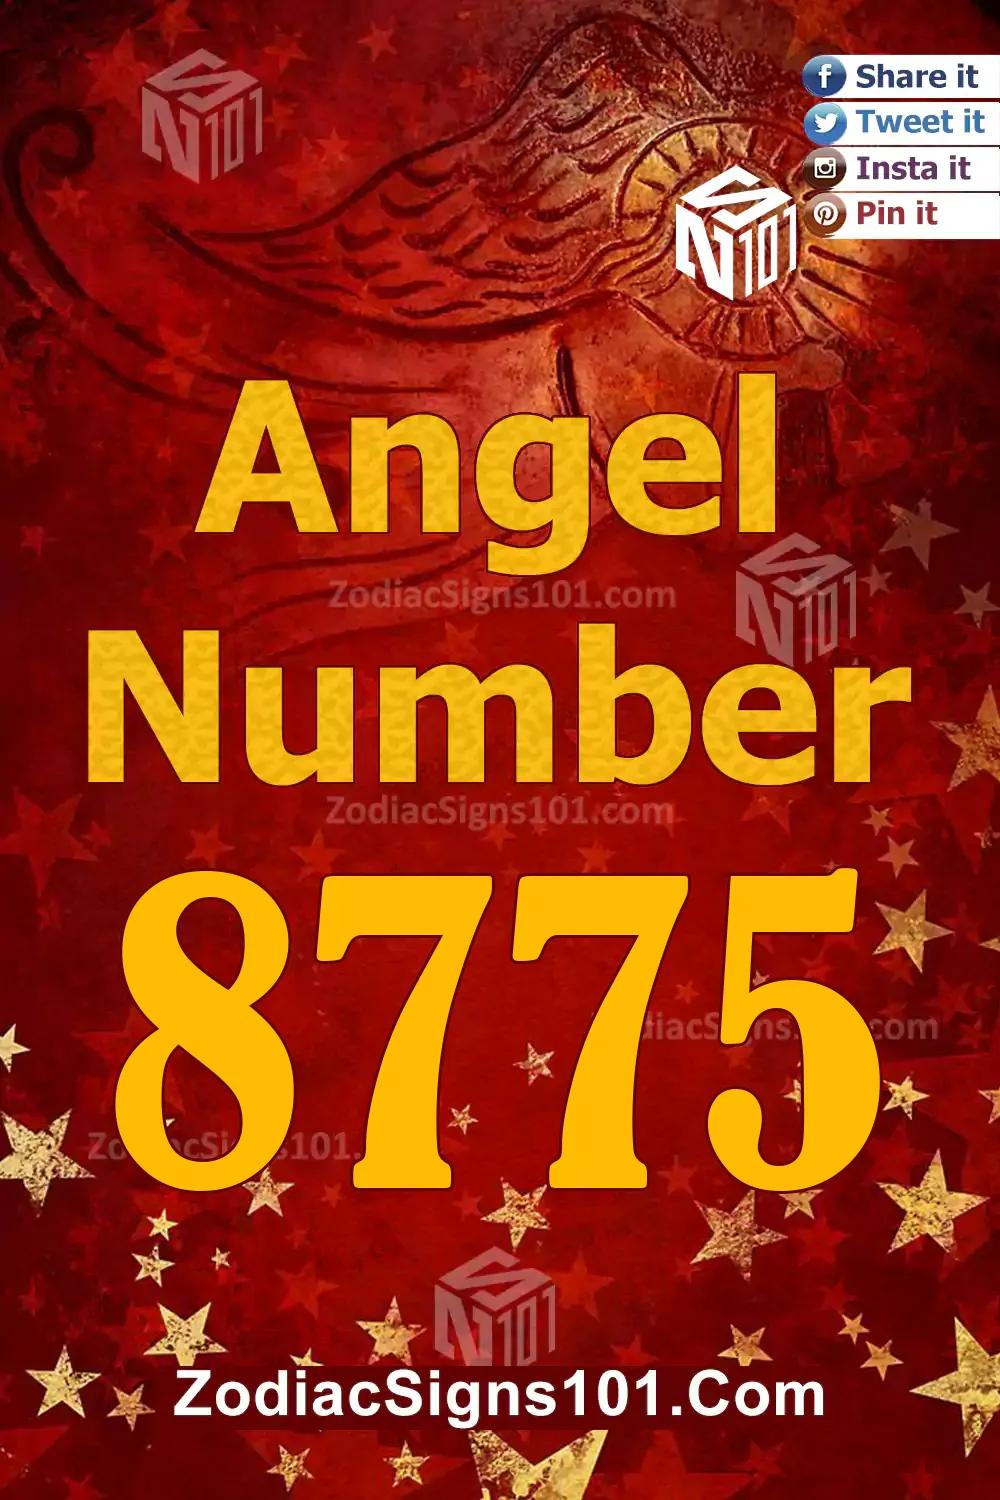 8775 Angel Number Meaning